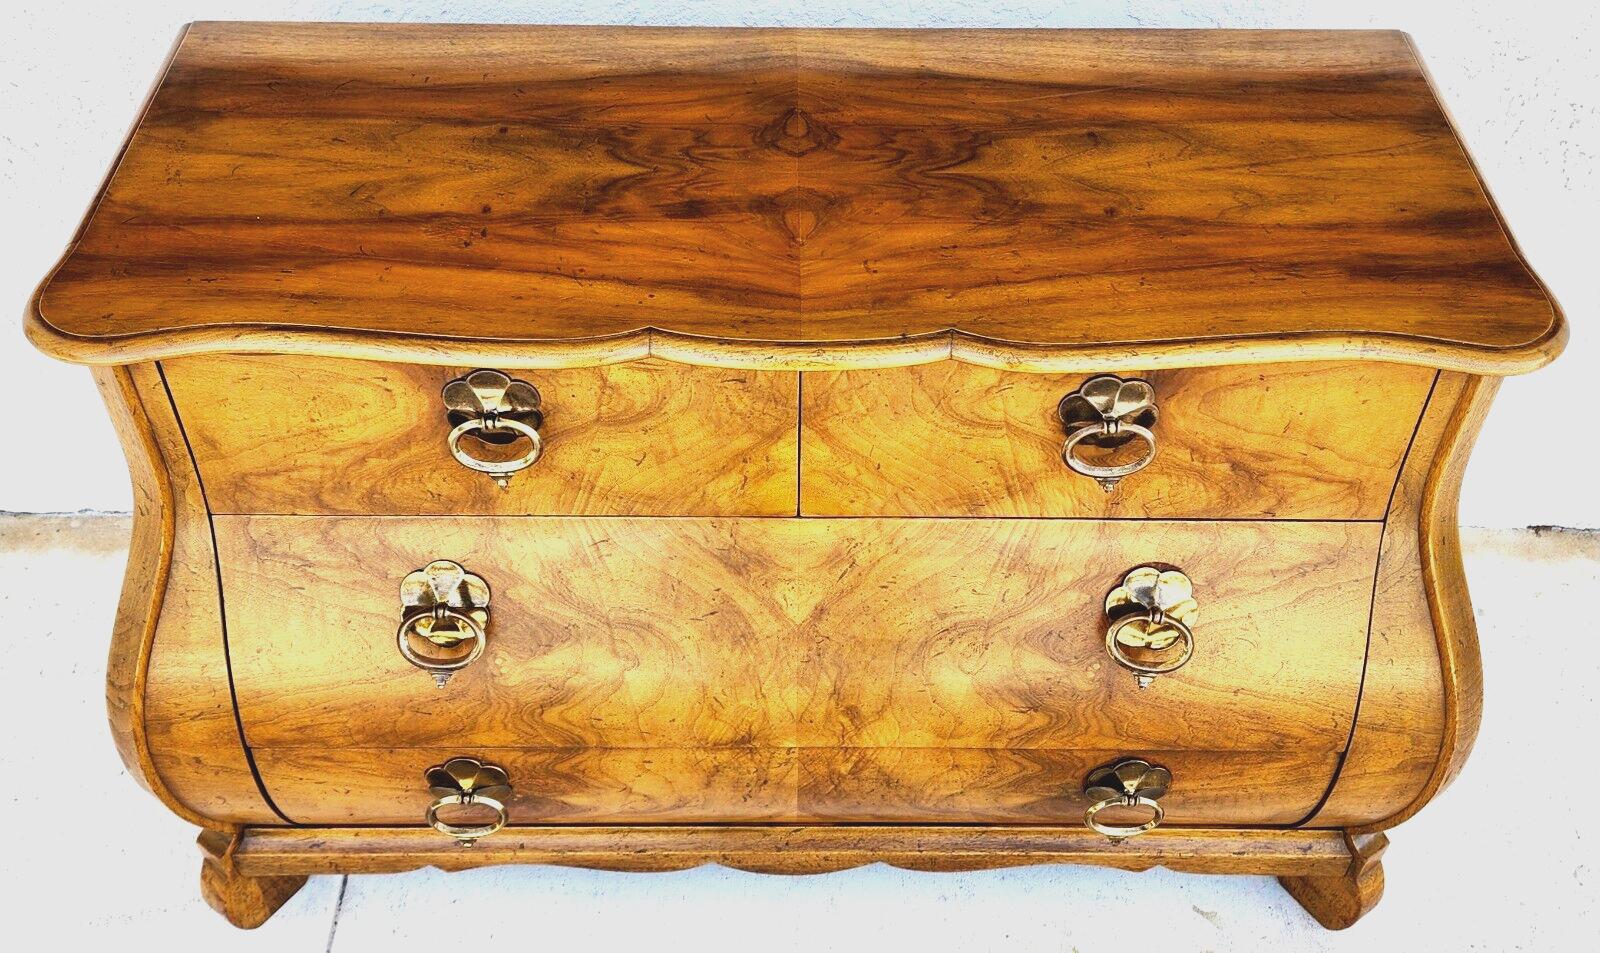 For FULL item description click on CONTINUE READING at the bottom of this page.
Offering One Of Our Recent Palm Beach Estate Fine Furniture Acquisitions Of A
Fantabulous Burl and Walnut Bombay Commode Chest by Baker Furniture

Approximate